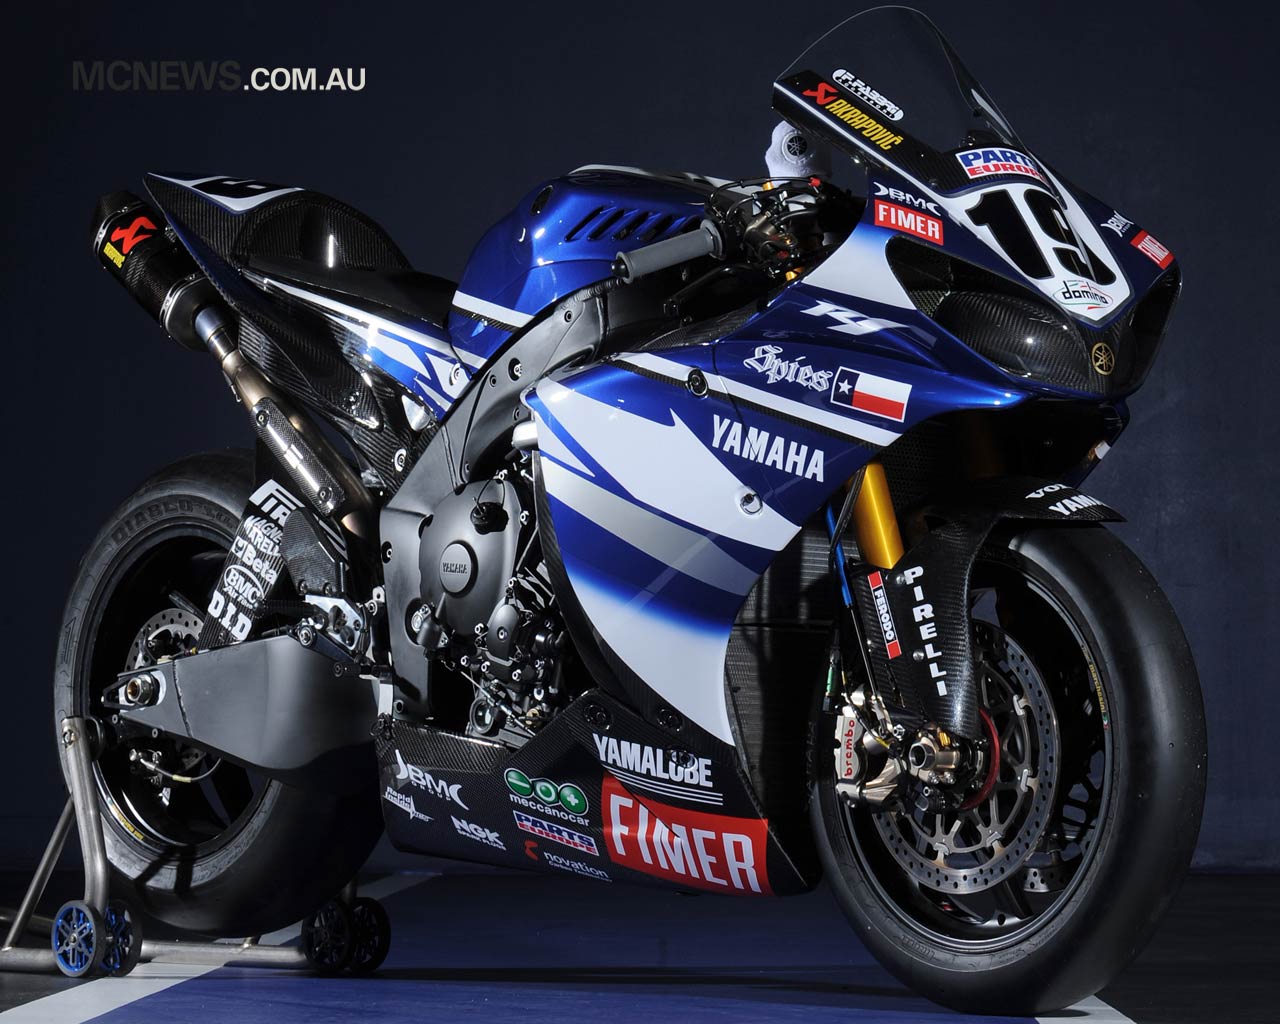 Free Download Yamaha Yzf R1 Desktop Wallpapers For Hd Widescreen And Mobile 1280x1024 For Your Desktop Mobile Tablet Explore 76 Yamaha R1 Wallpaper Yamaha Logo Wallpaper Yamaha Bolt Wallpaper